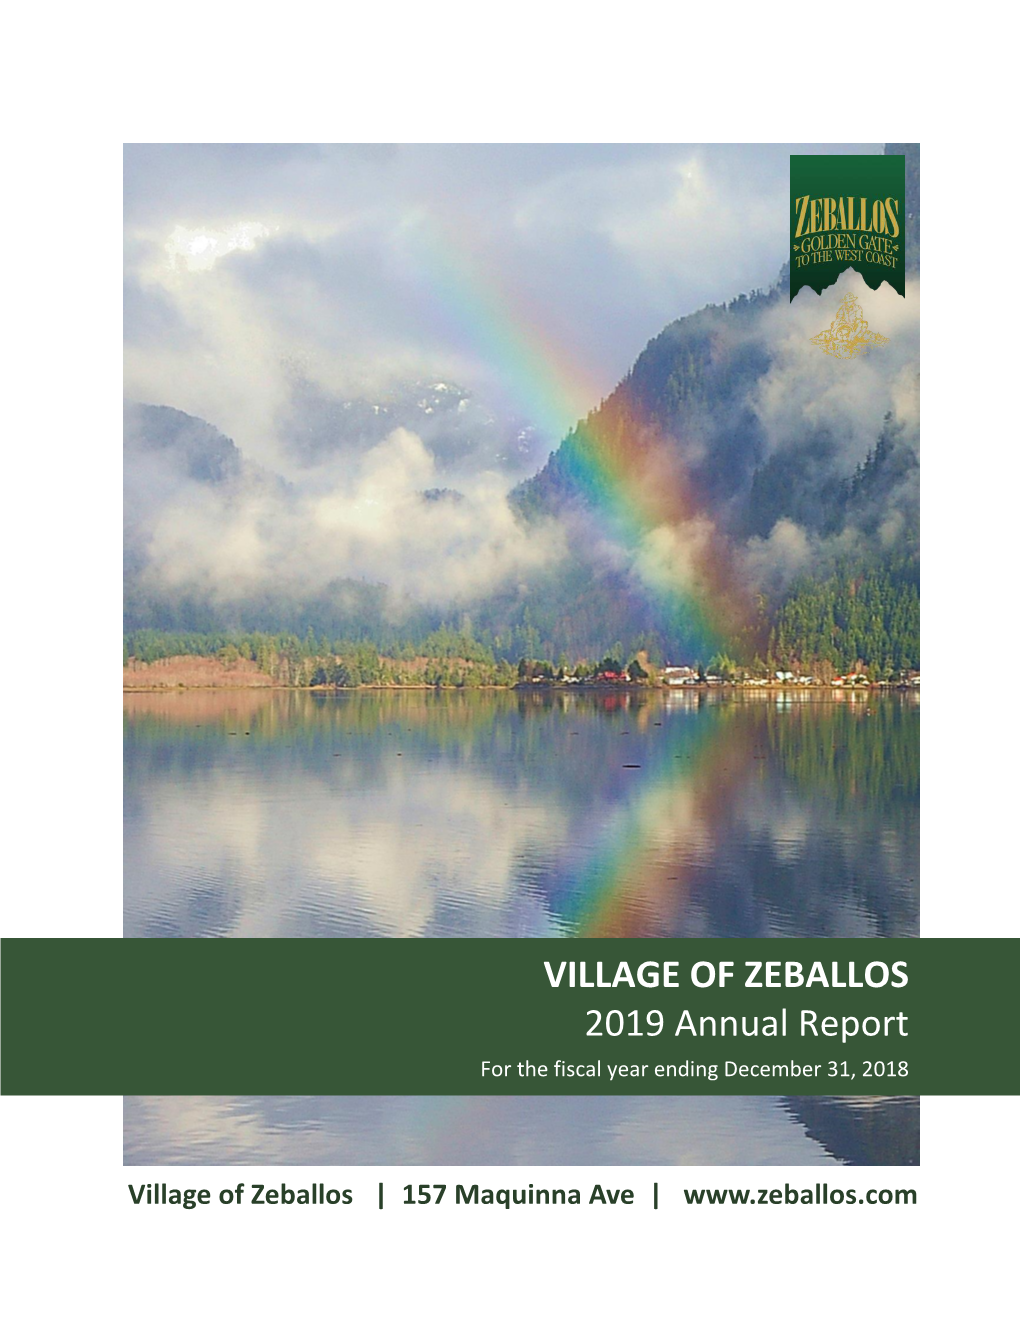 VILLAGE of ZEBALLOS 2019 Annual Report for the Fiscal Year Ending December 31, 2018